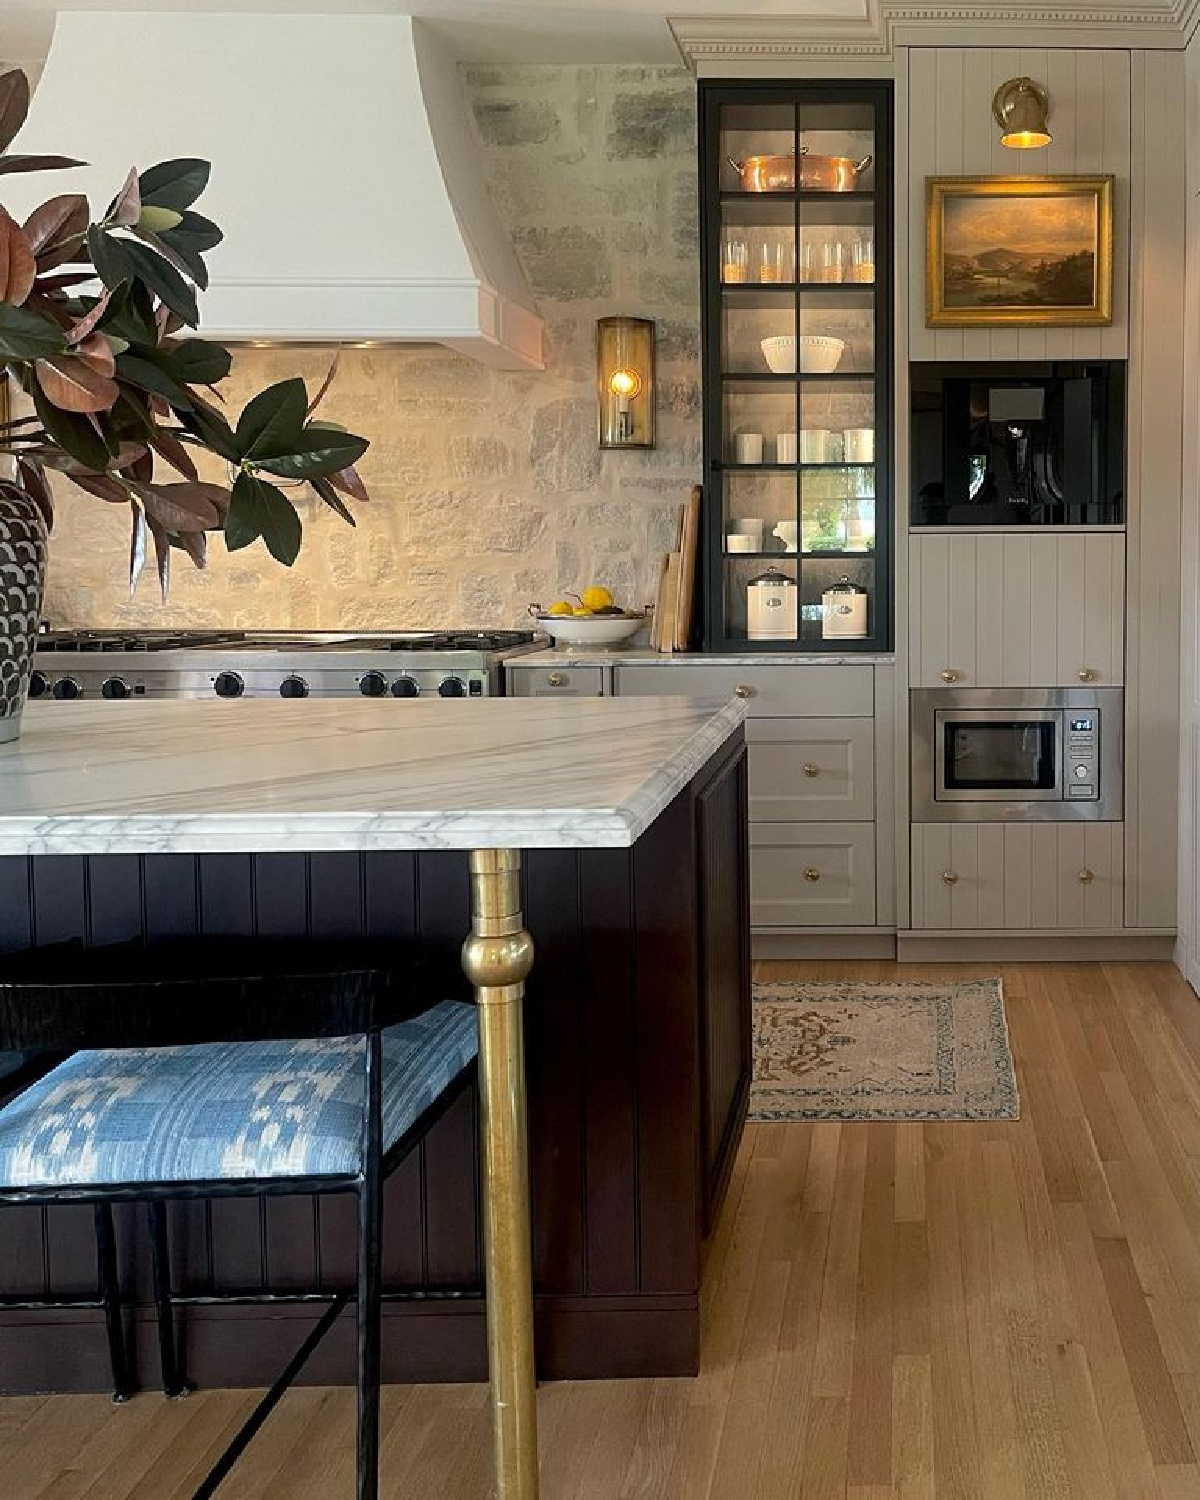 Farrow & Ball Jitney on cabinets in beautiful timeless kitchen with over-grouted stone backsplash and putty cabinets - @m_m_interior_design. #farrowandballjitney #timelesskitchen #stonebacksplash #europeanluxury